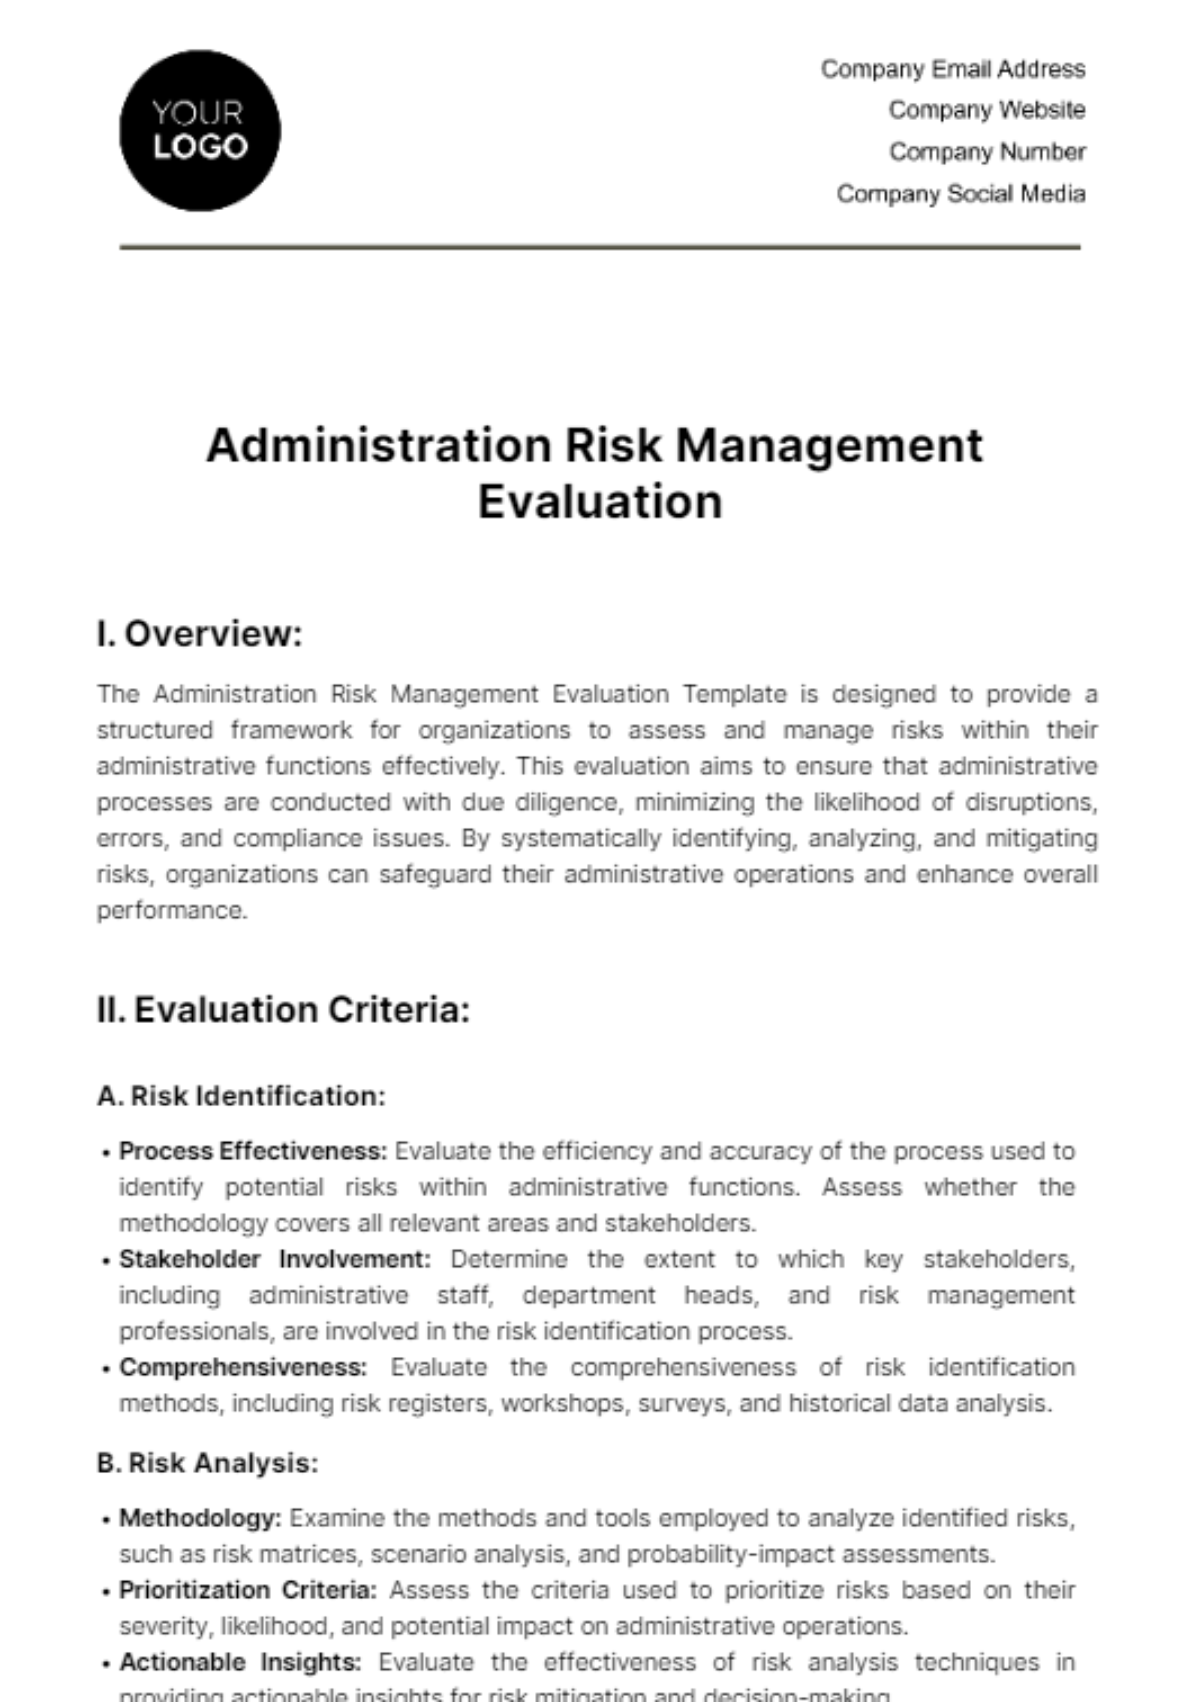 Free Administration Risk Management Evaluation Template